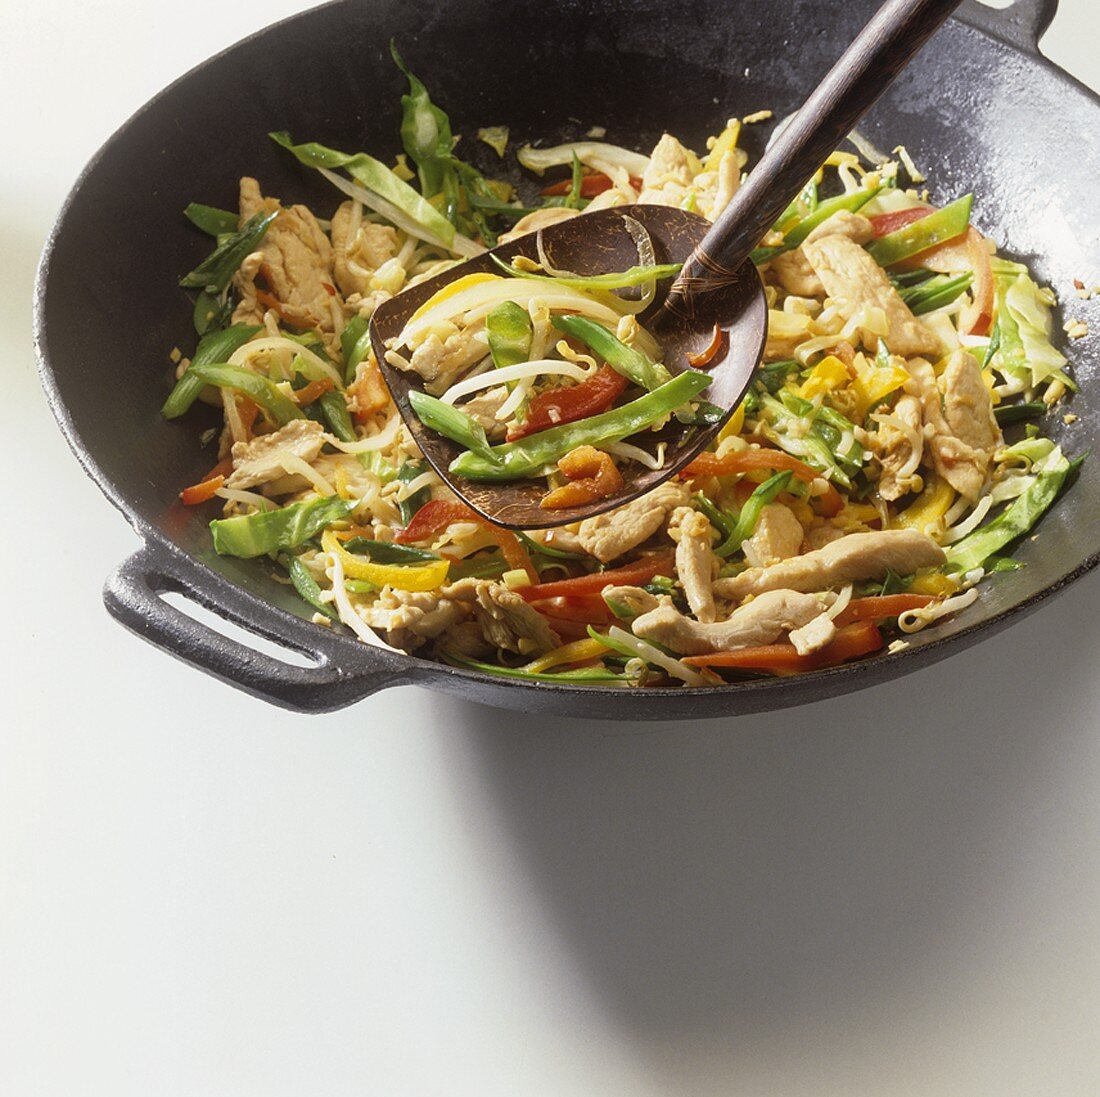 Strips of chicken breast and vegetables in wok